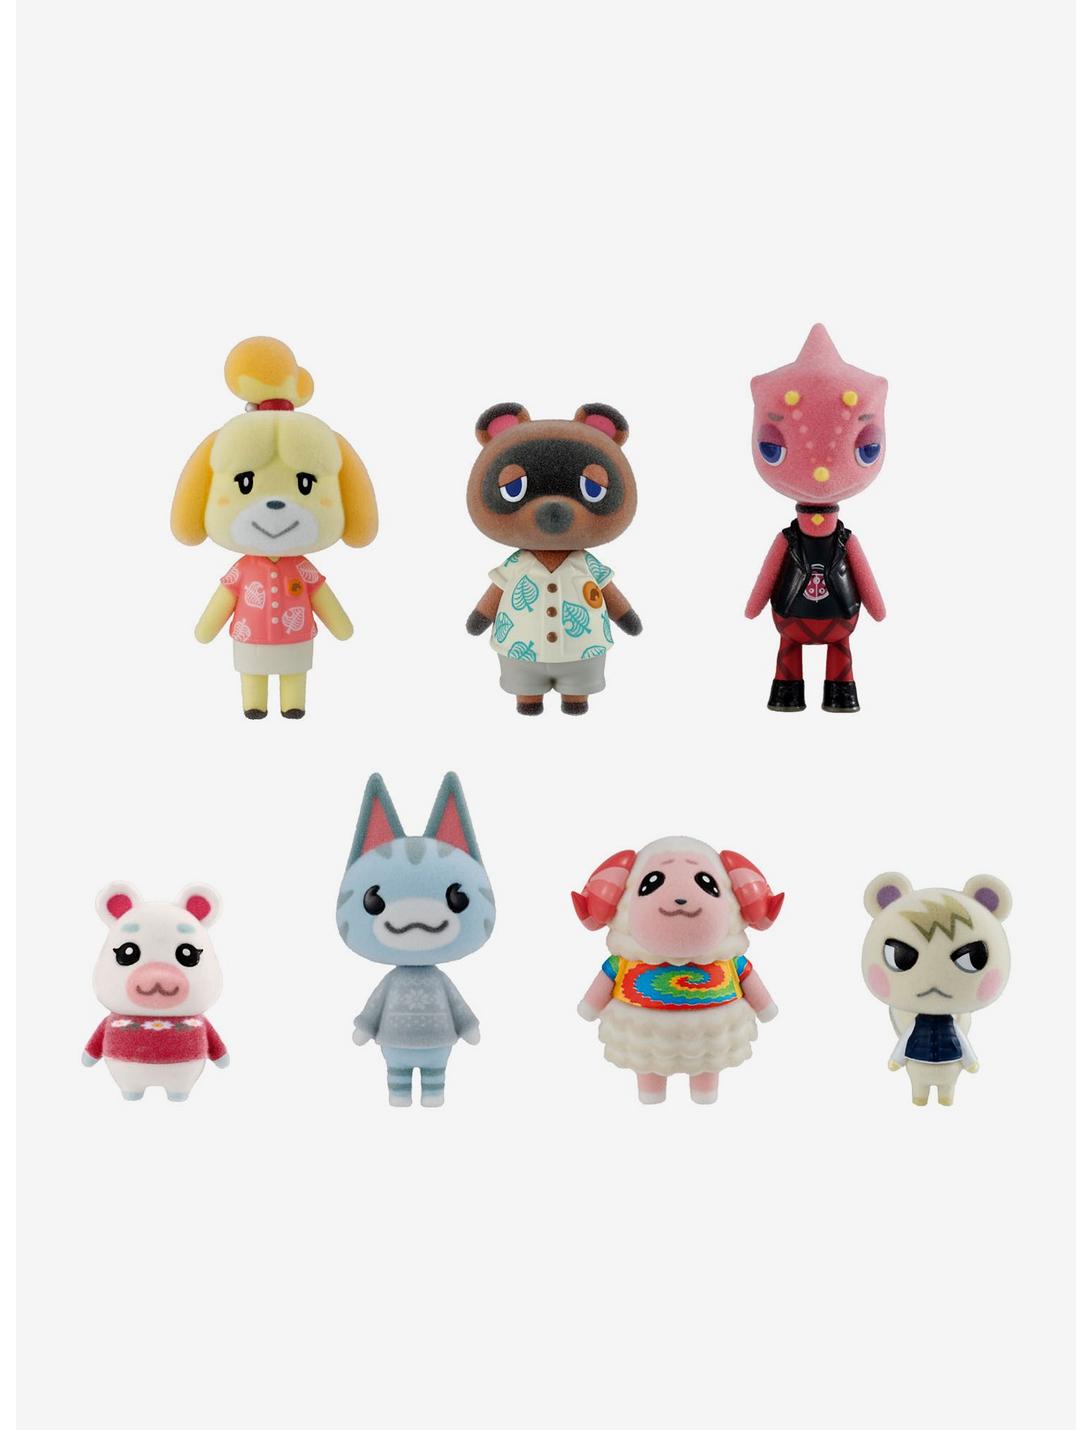 Isabelle Summer Outfit Amiibo - Animal Crossing Series [Nintendo Accessory]  